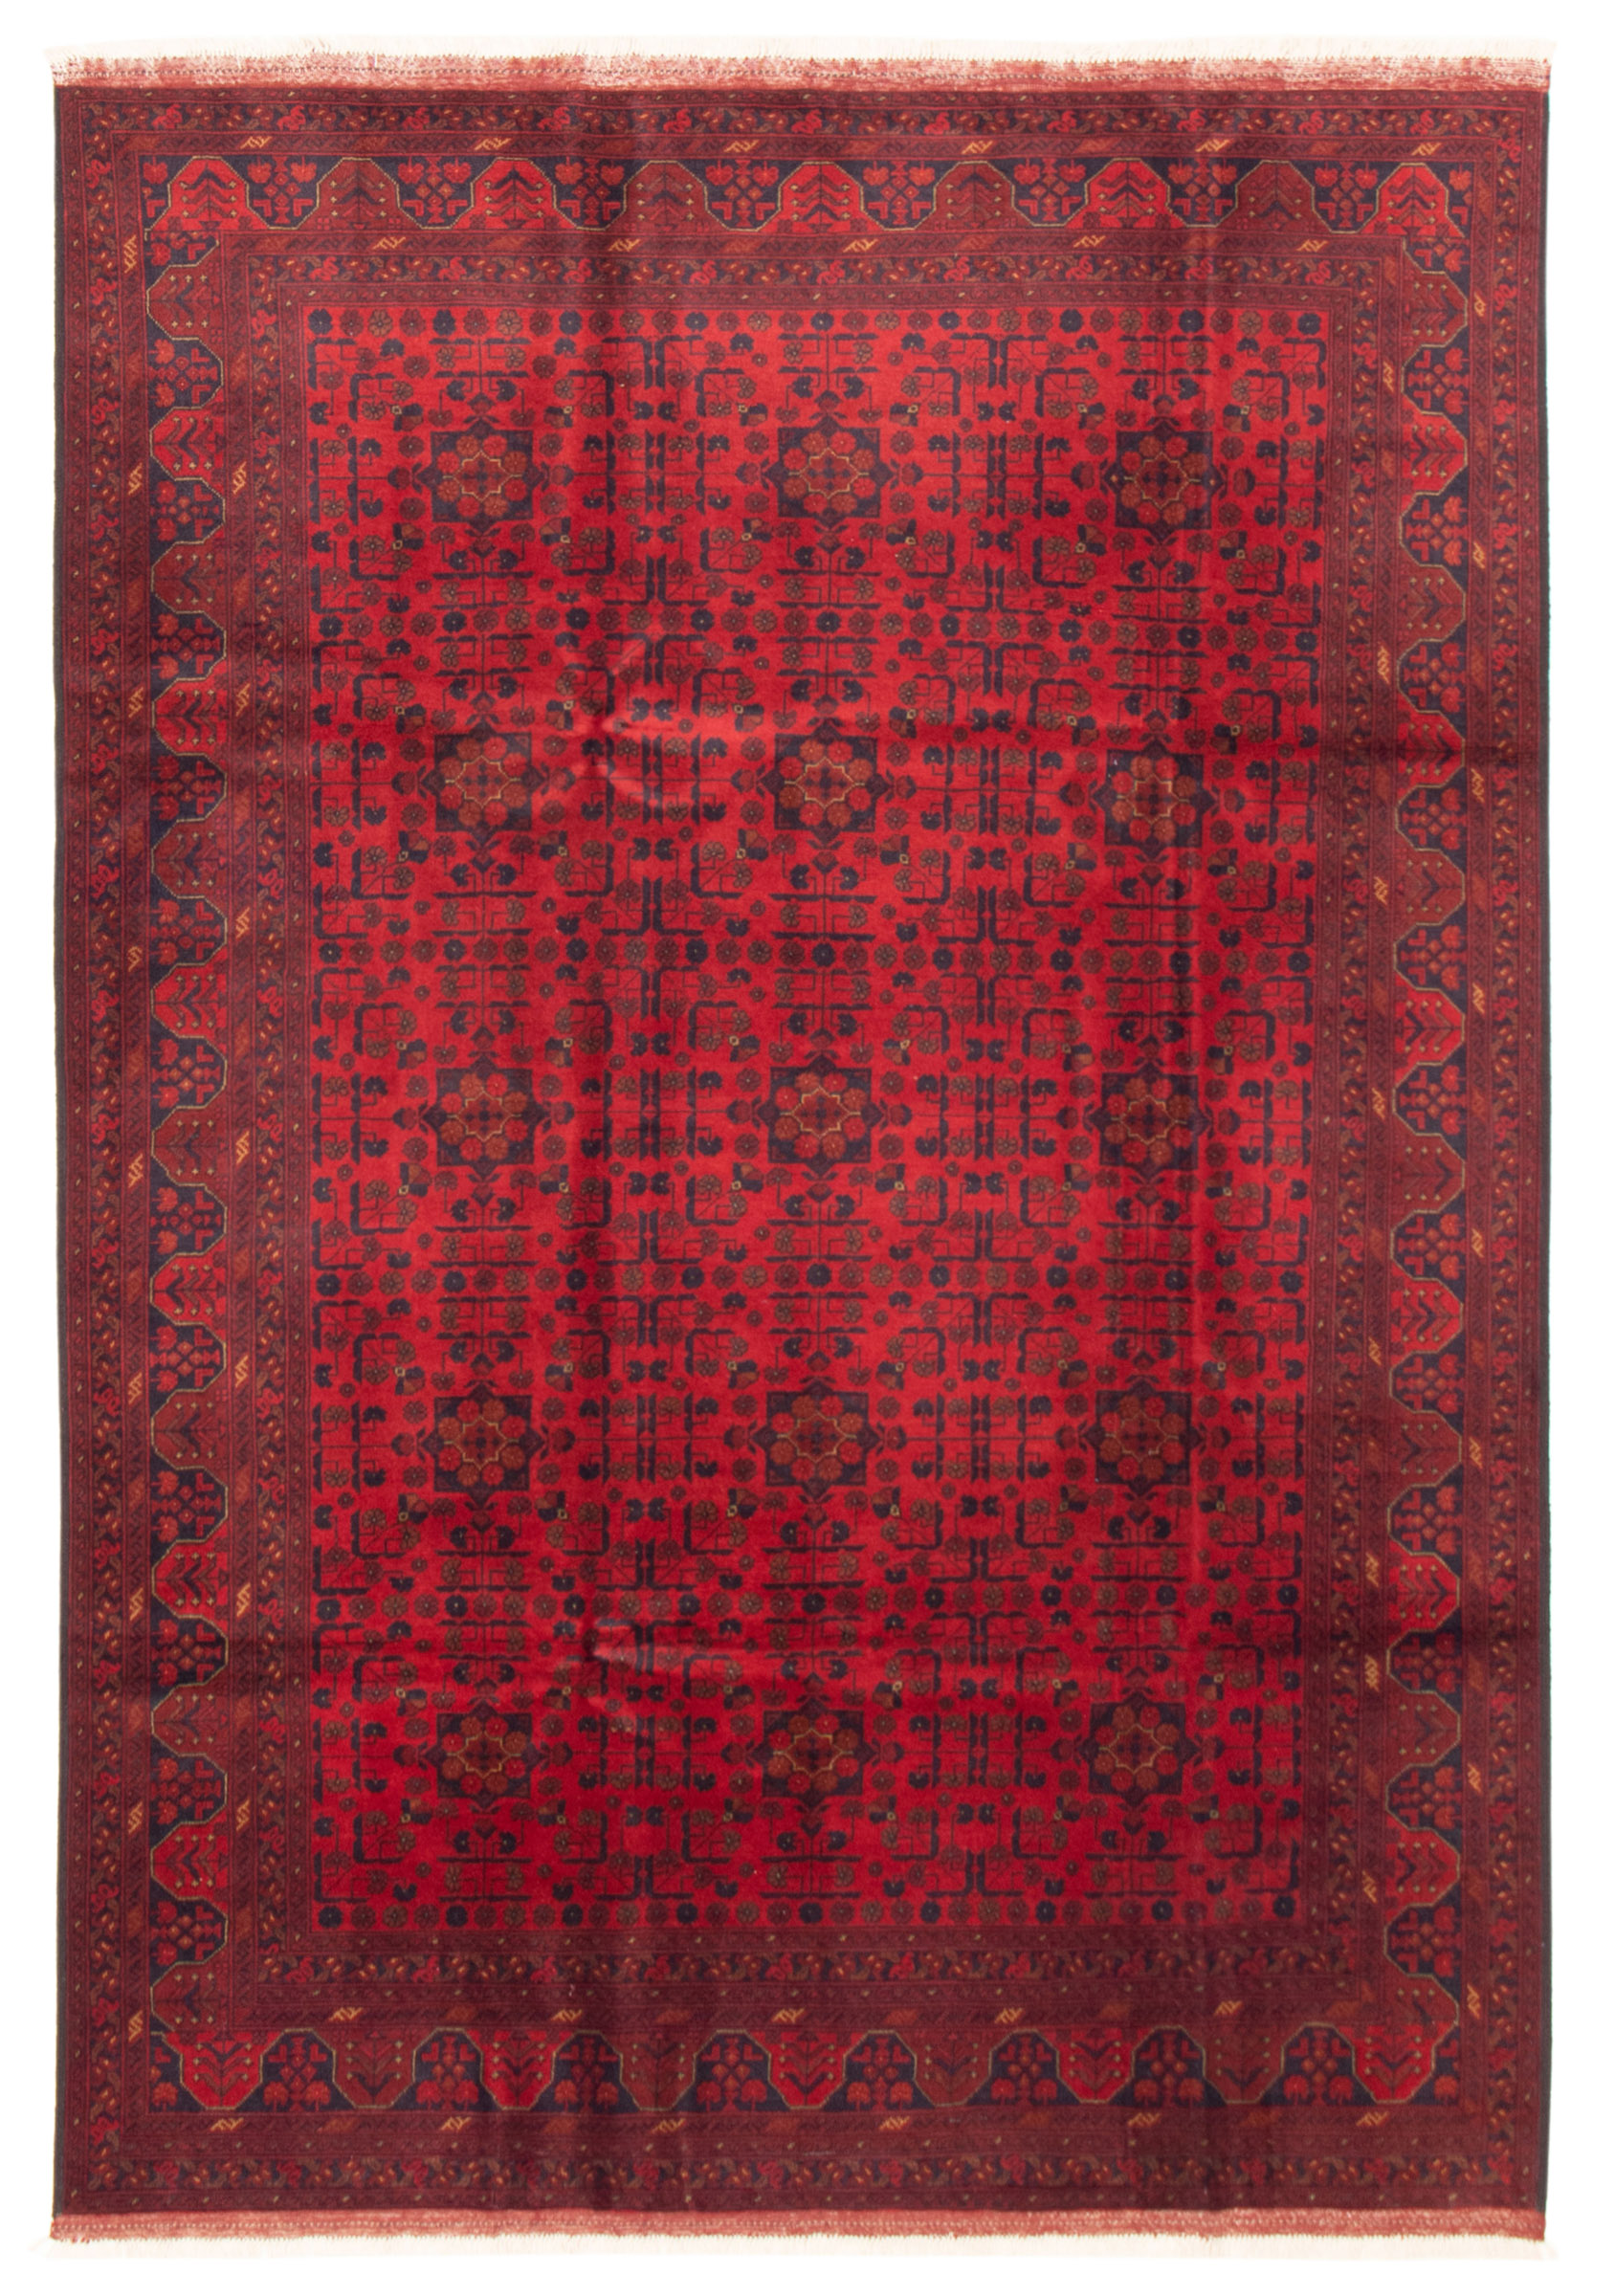 Bedroom Hand-Knotted Wool Rug eCarpet Gallery Area Rug for Living Room 347847 Finest Khal Mohammadi Bordered Red Rug 4'0 x 6'3 